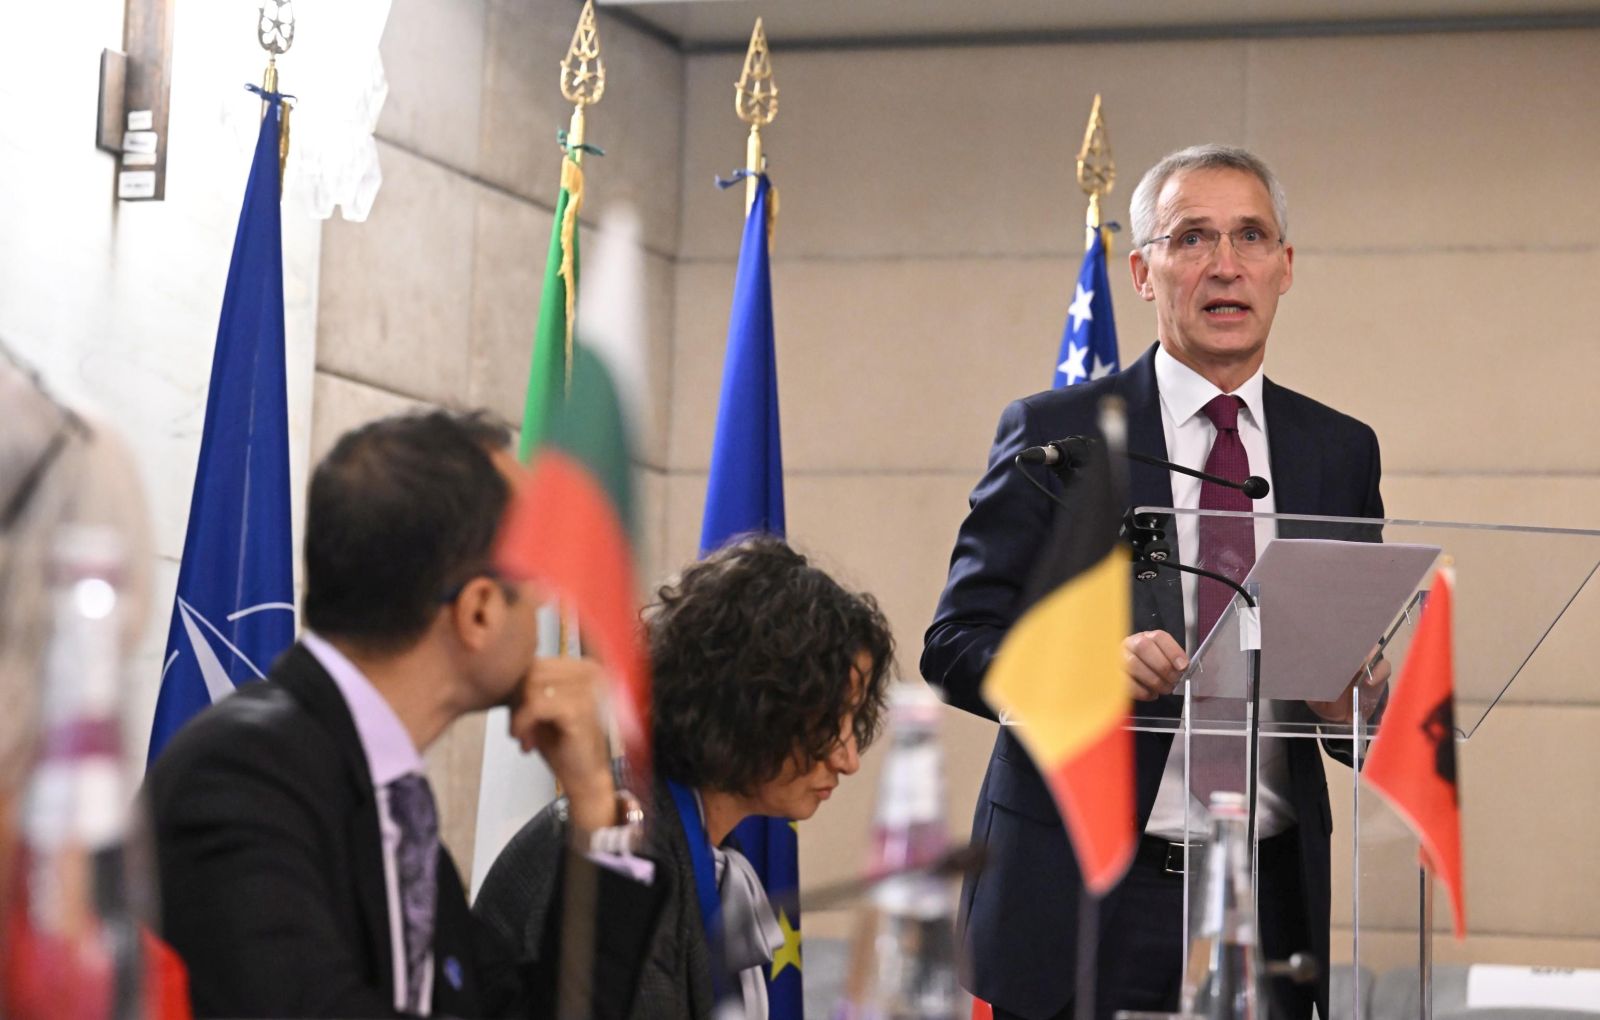 epa10297882 NATO Secretary General Jens Stoltenberg delivers an address during the NATO Cyber Defence Pledge Conference 2022 at the Farnesina Palace in Rome, Italy, 10 November 2022. The event, discussing NATO's effort to counter cyber threats and to ensure the NATO Cyber Defense Pledge, is co-hosted by Italy and the United States.  EPA/CLAUDIO PERI